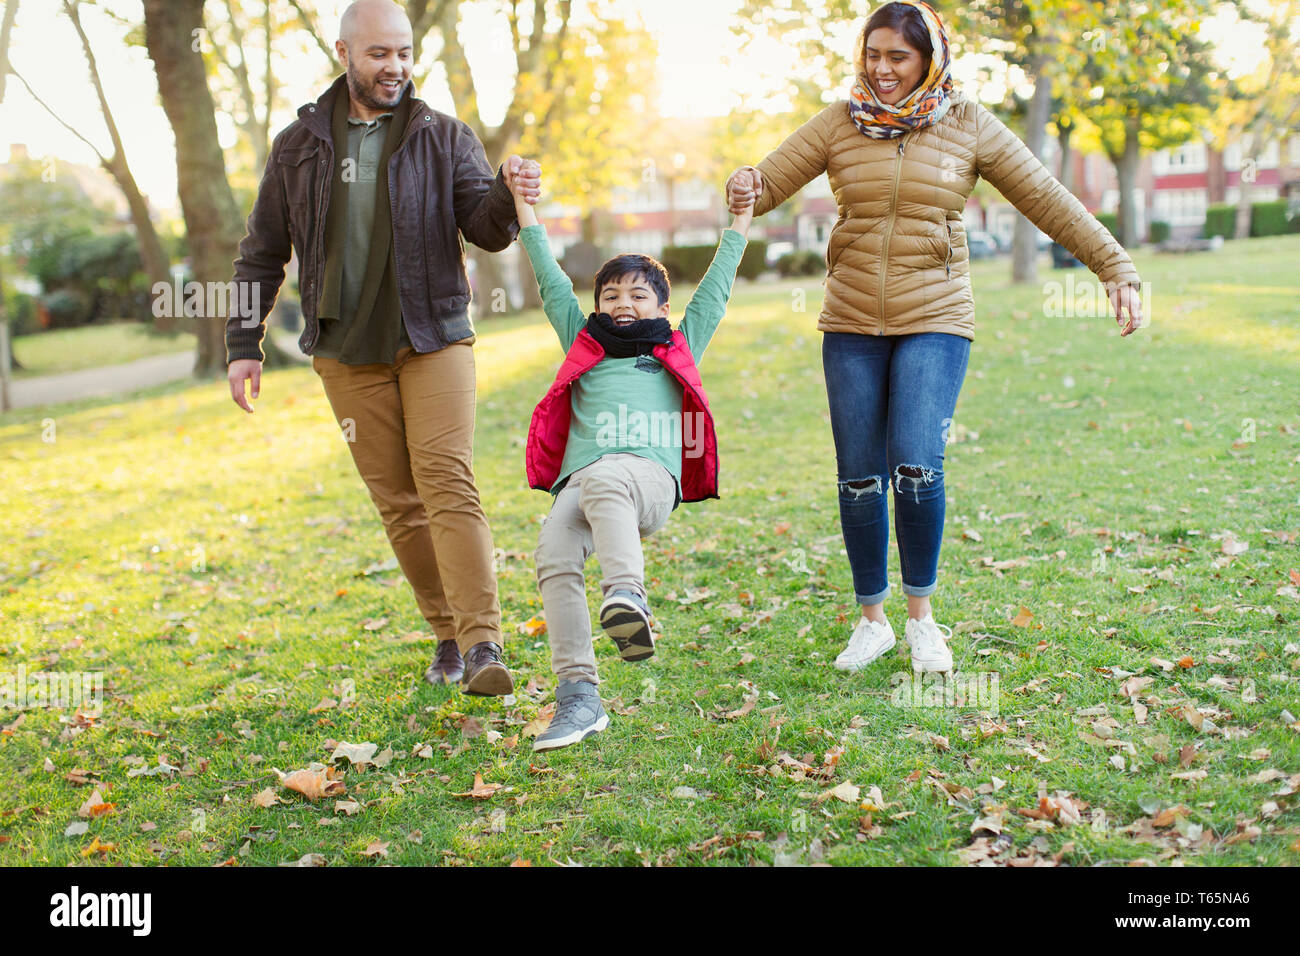 Playful Muslim family in autumn park Stock Photo